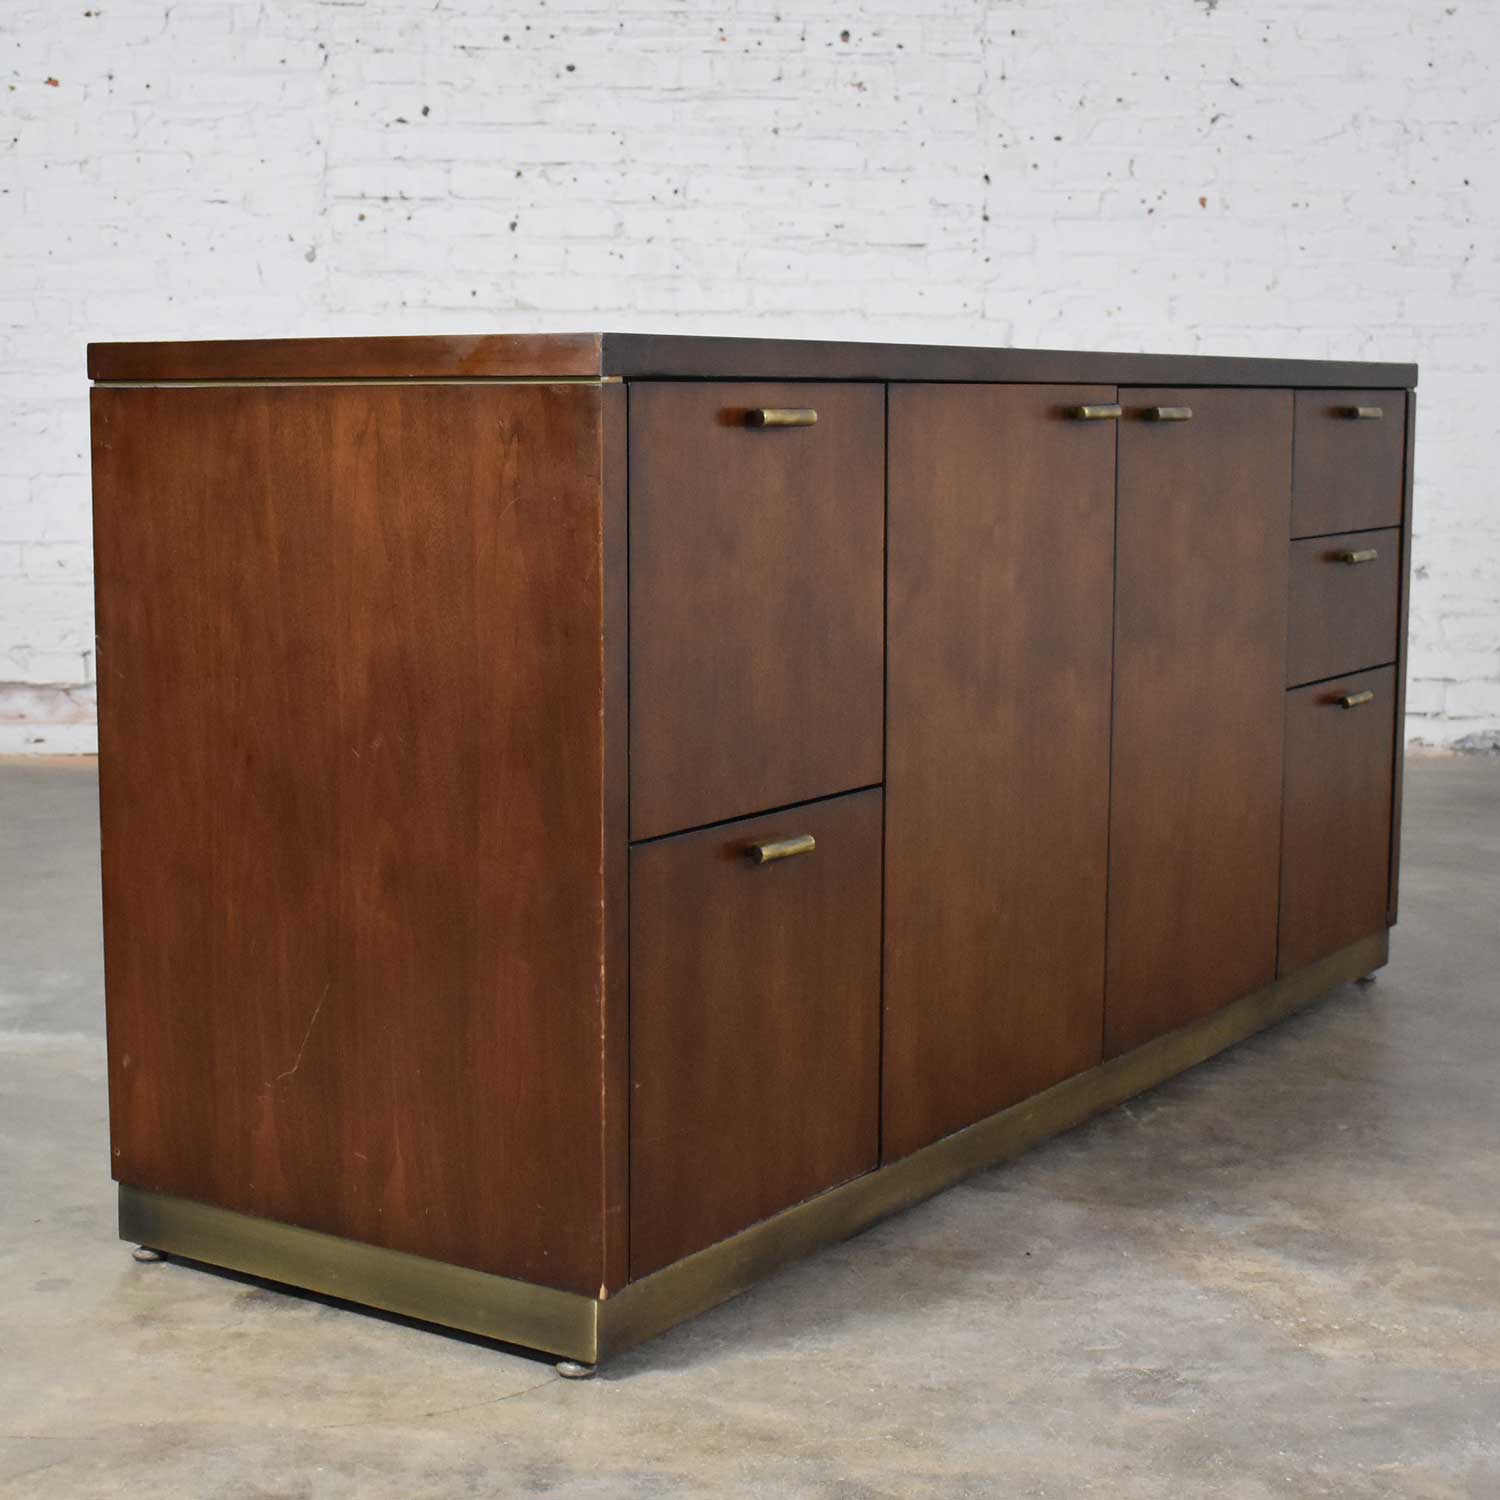 Large Mid Century Modern Cantilever Executive Desk & Credenza by Myrtle Desk Company